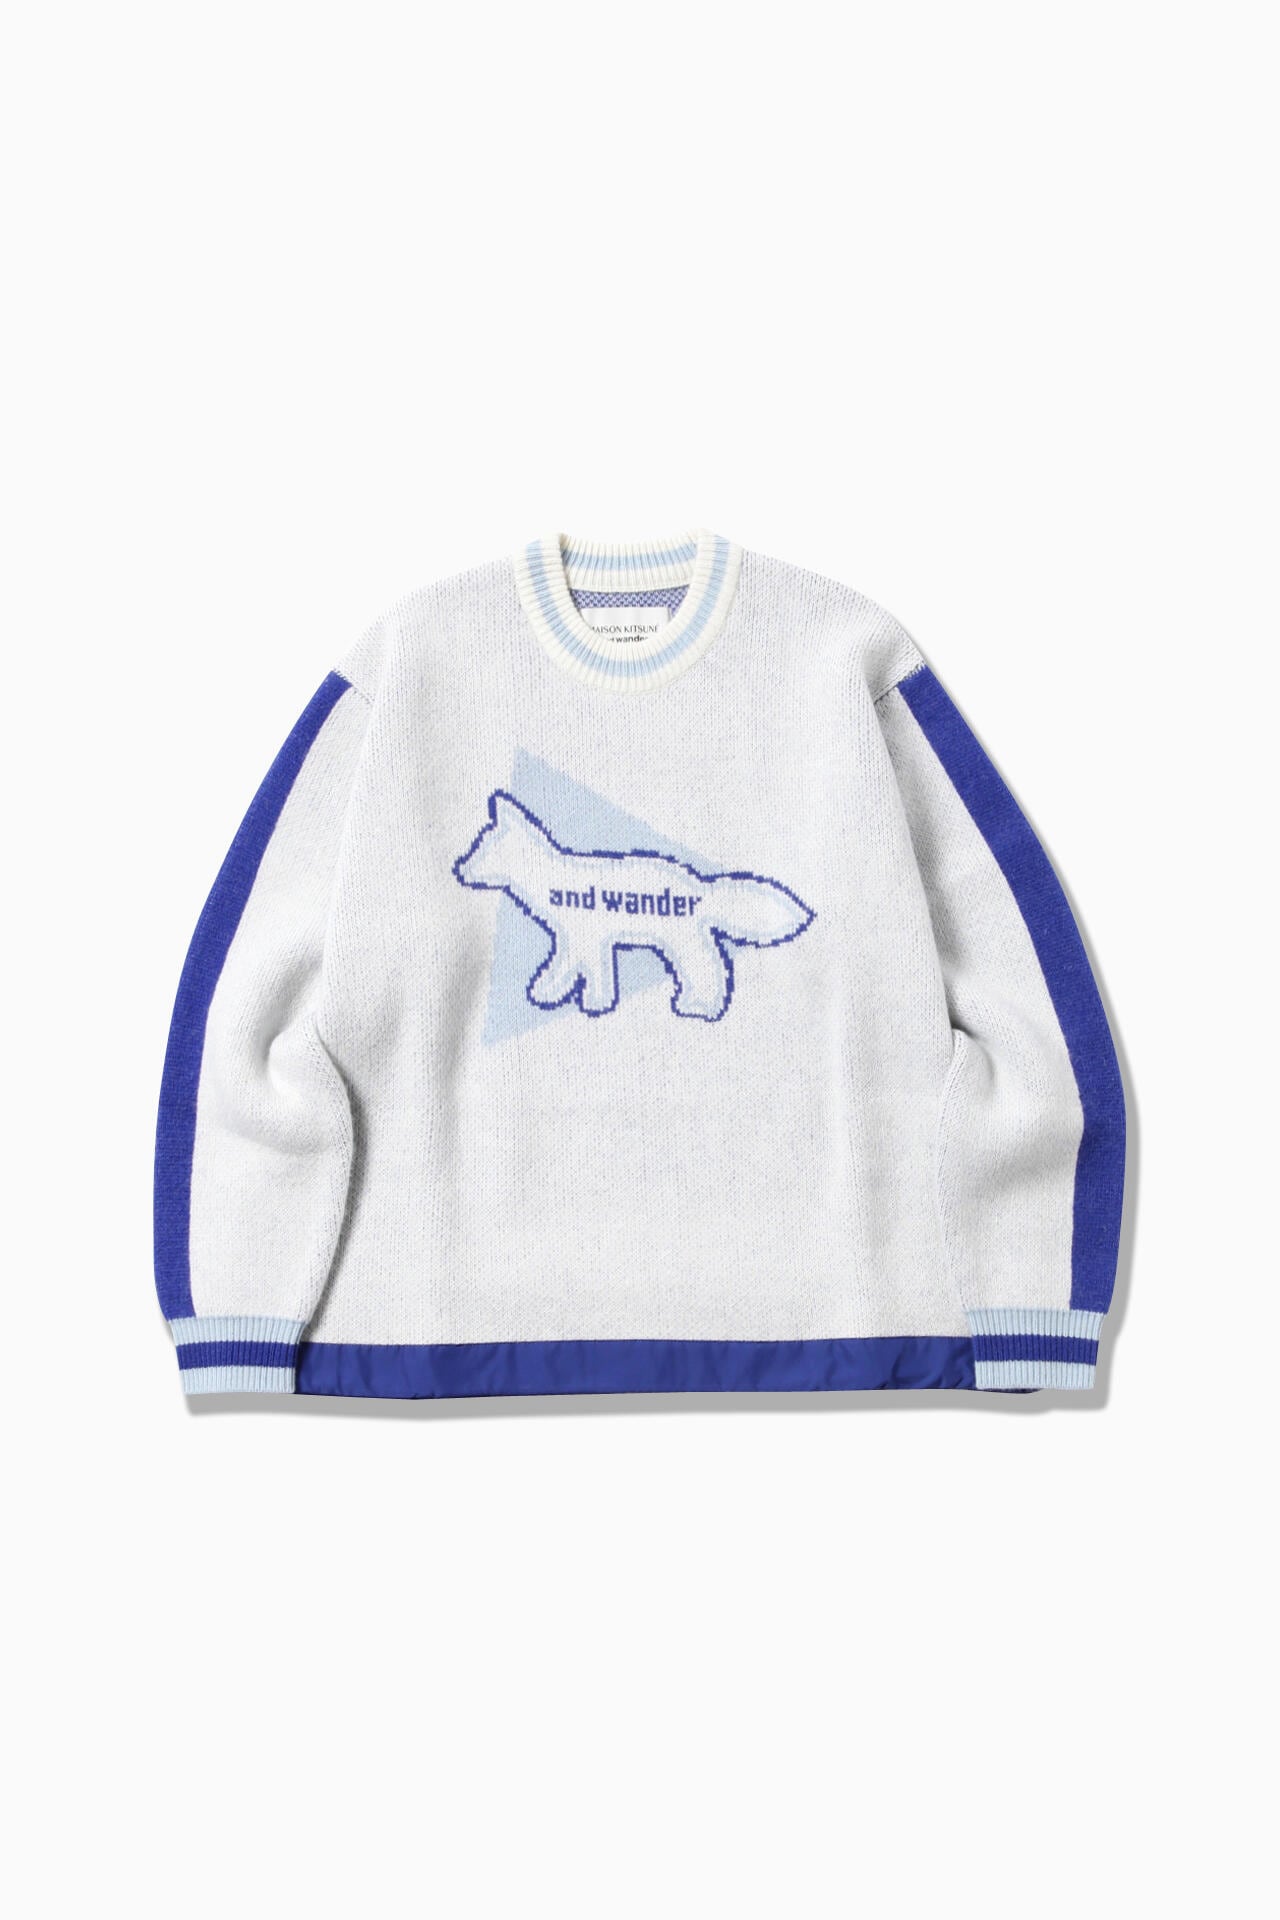 MAISON KITSUNÉ × and wander knit pullover | cut_knit | and wander ...